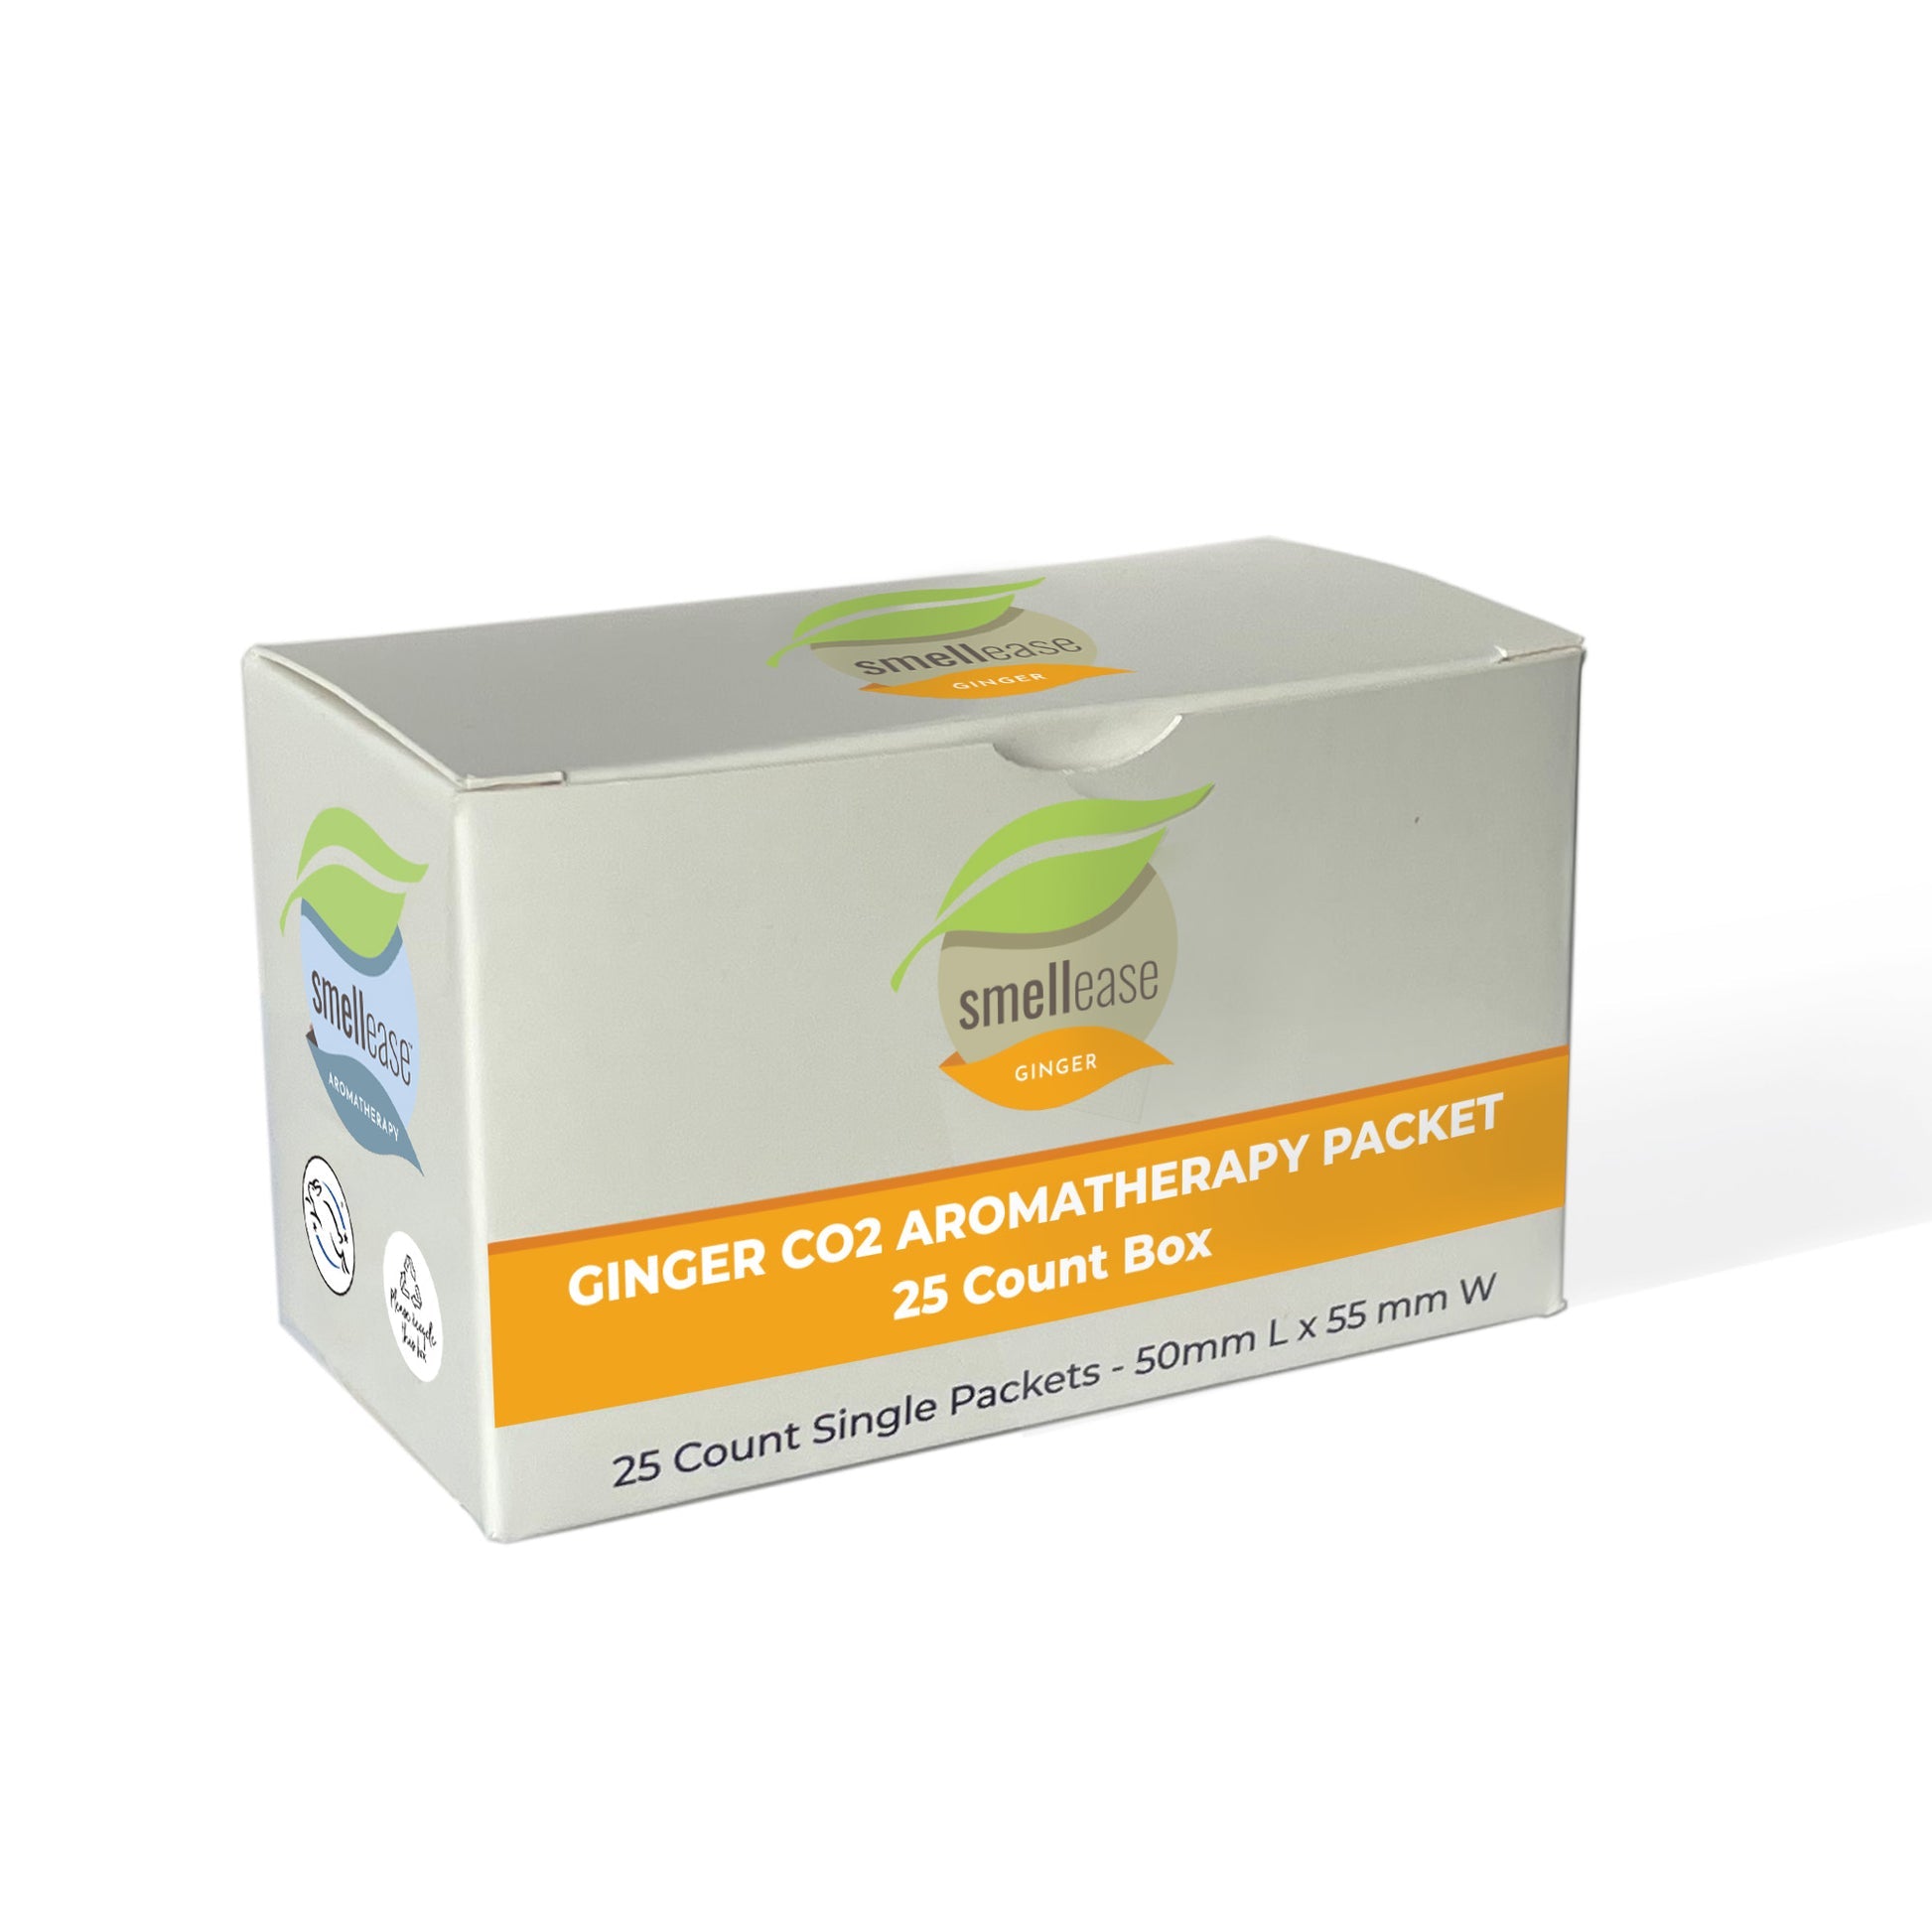  Ginger Aromatherapy Packet 25 Count Box Plant Therapy Perfumarie